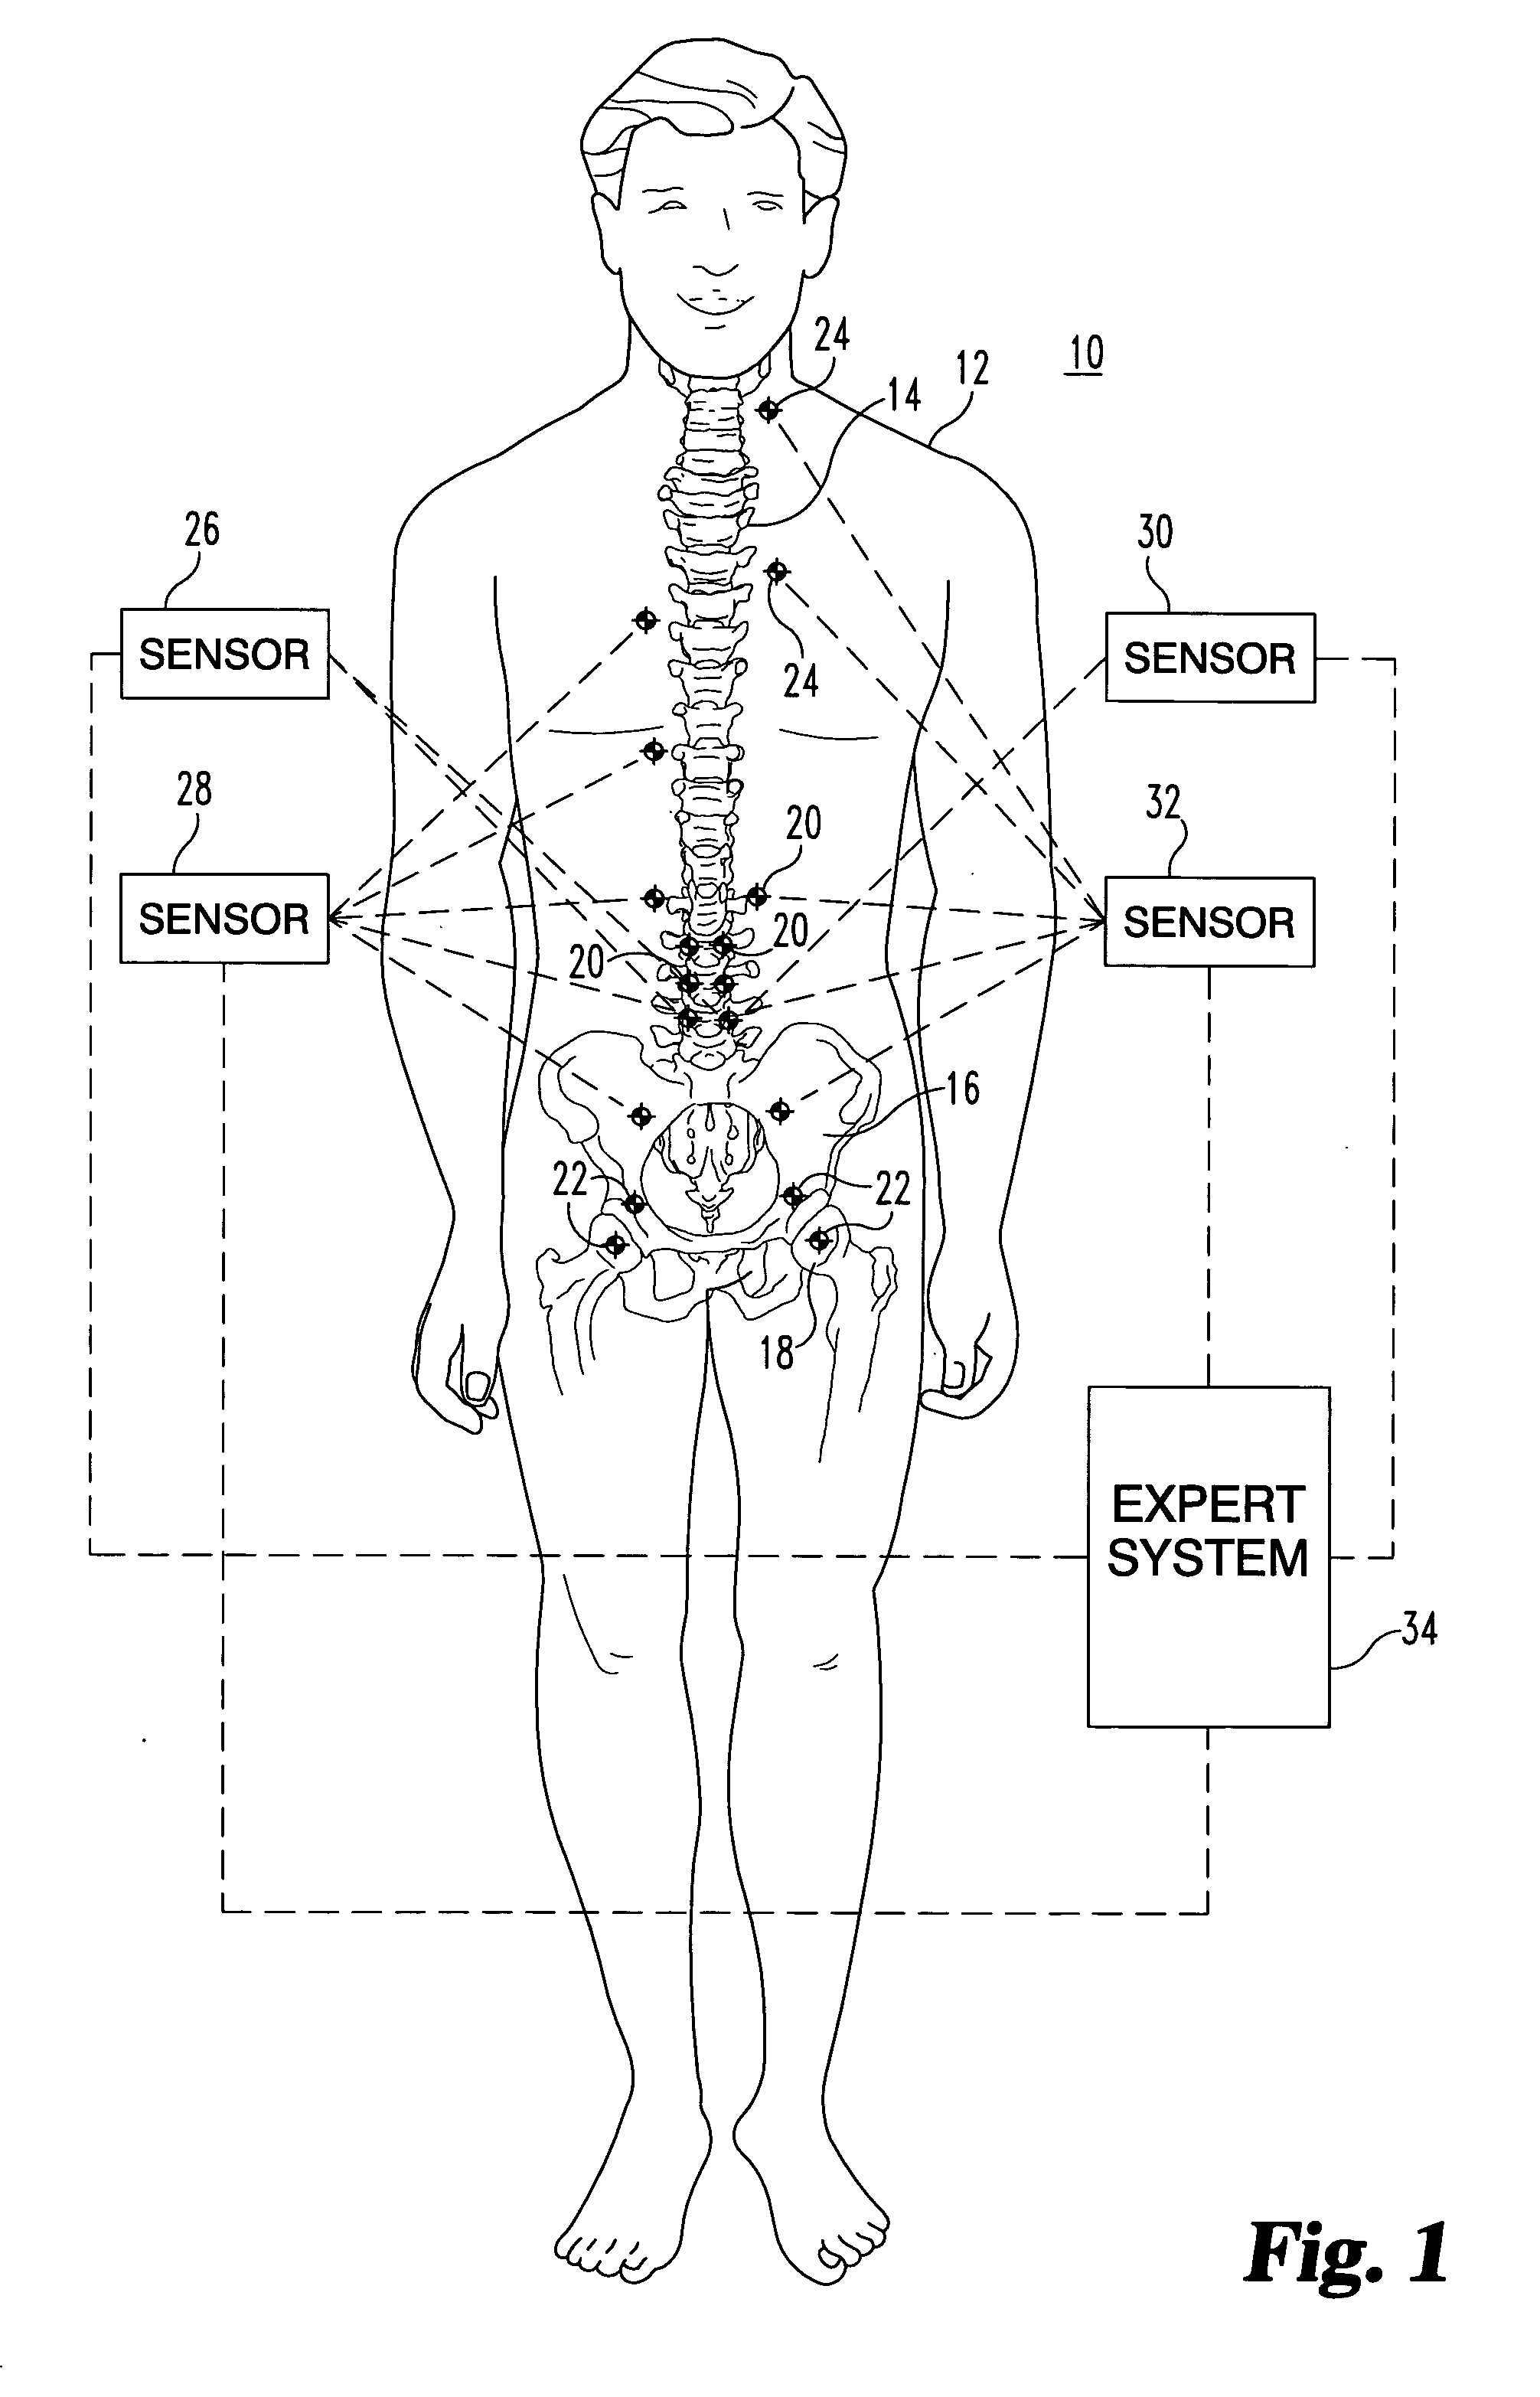 Method and apparatus for expert system to track and manipulate patients